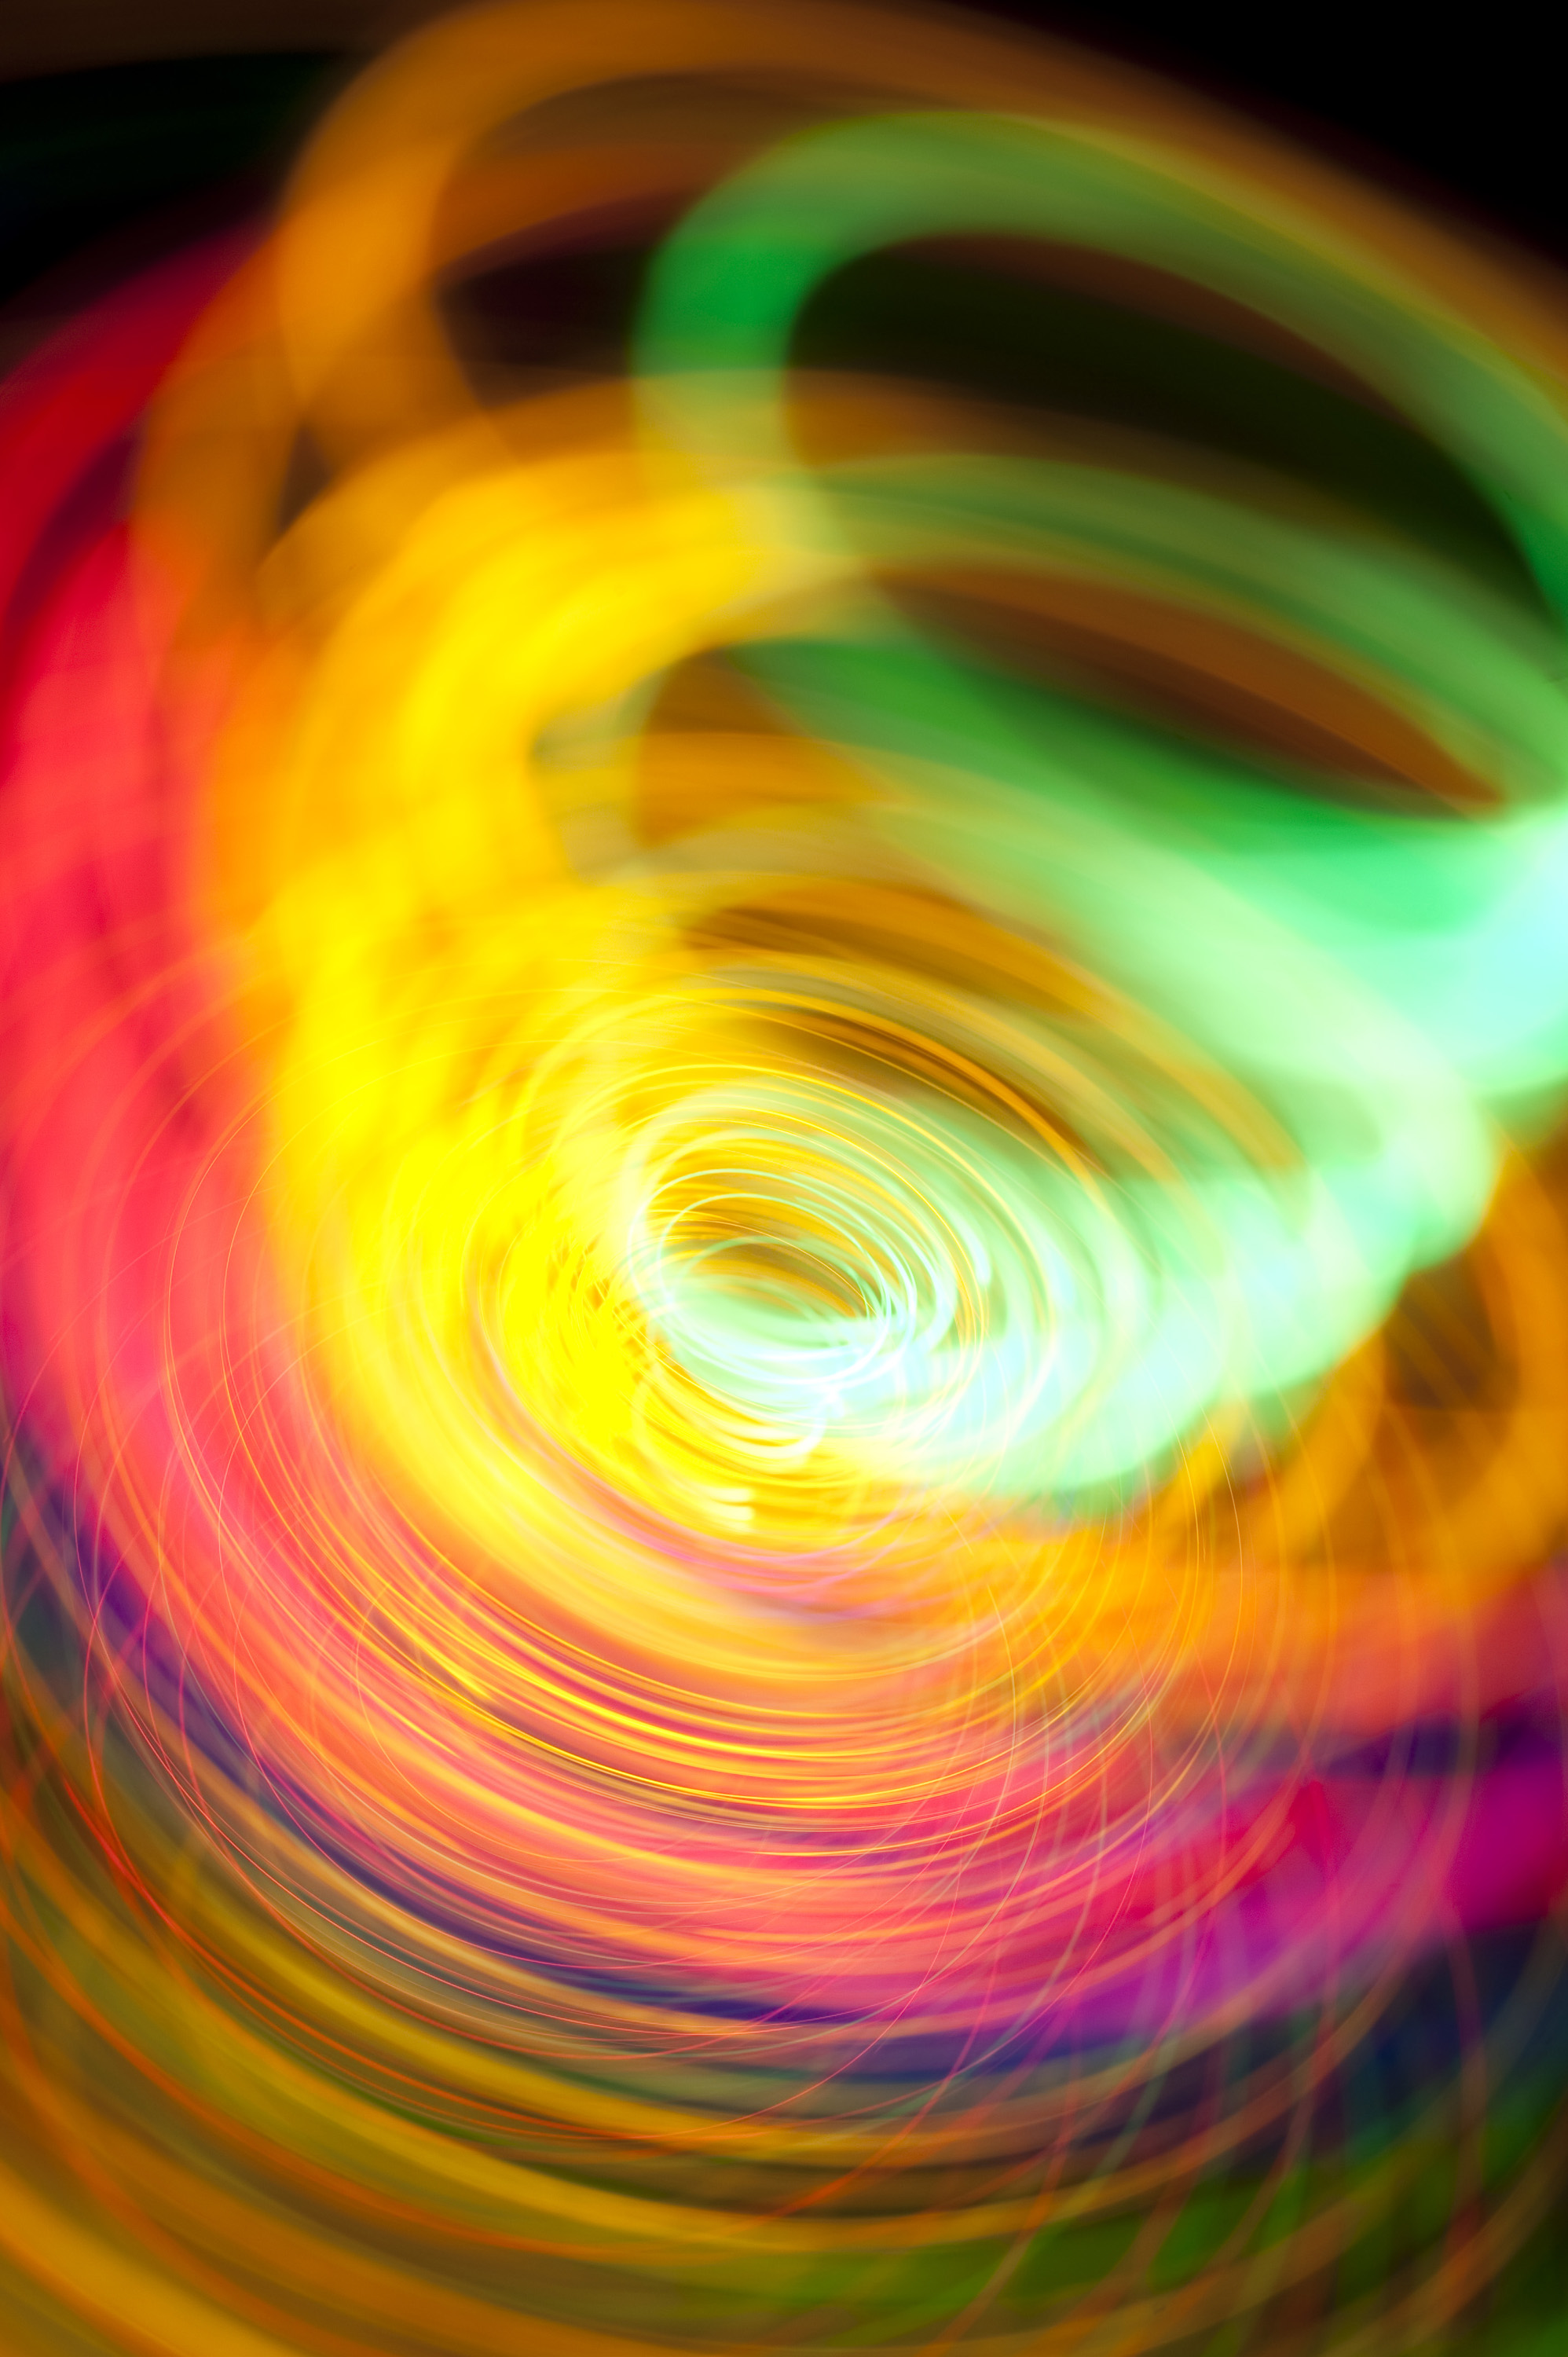 abstract, shine, light, multicolored, motley, blur, smooth, funnel cell phone wallpapers